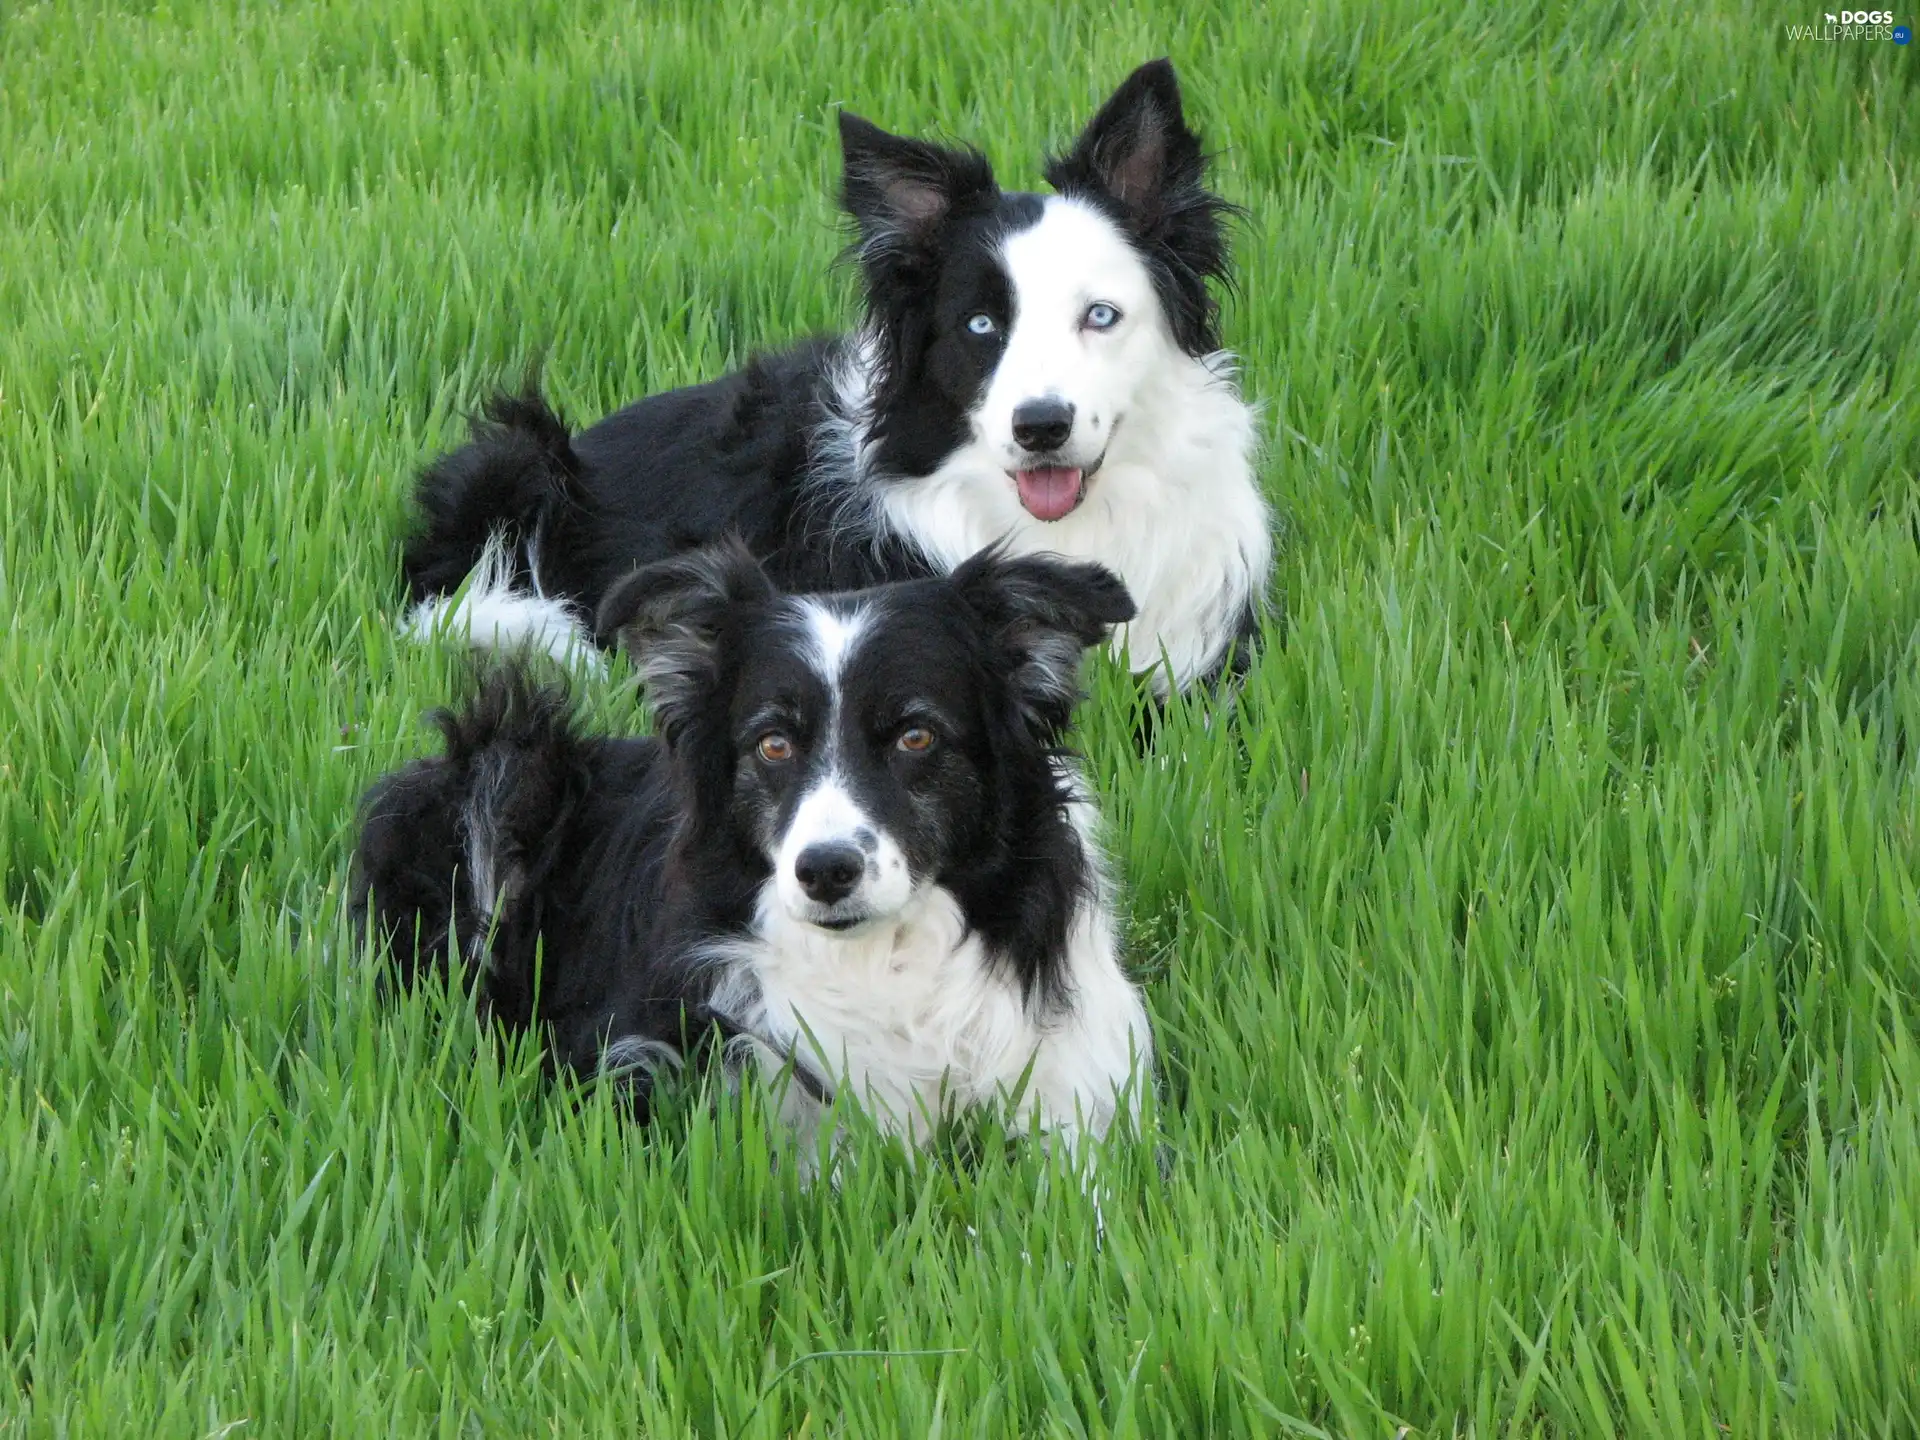 grass, Border Collie, Two cars, puppies